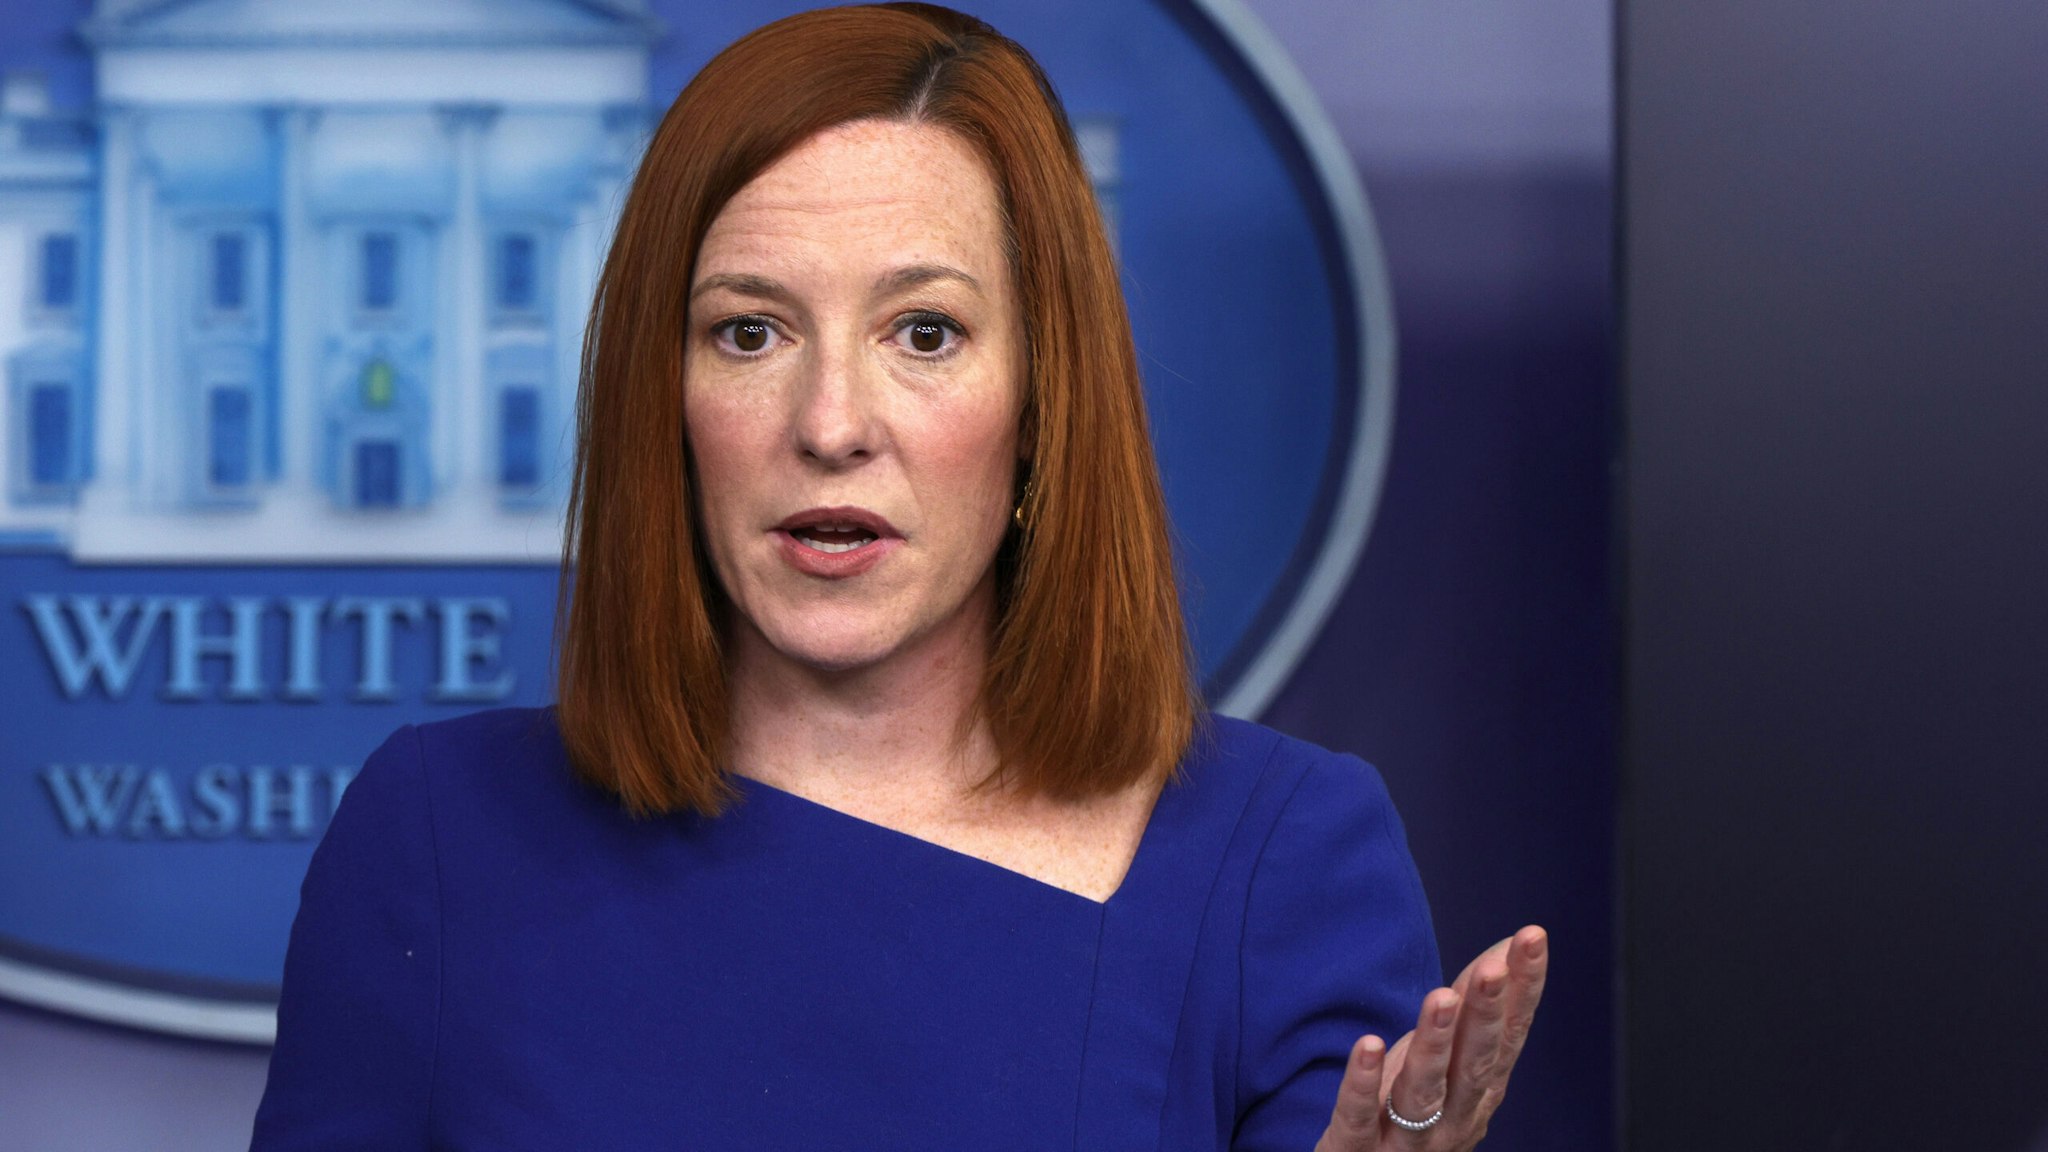 WASHINGTON, DC - FEBRUARY 22: White House Press Secretary Jen Psaki speaks during a news briefing at the James Brady Press Briefing Room of the White House February 22, 2021 in Washington, DC. Psaki held a news briefing to answer questions from the members of the press.